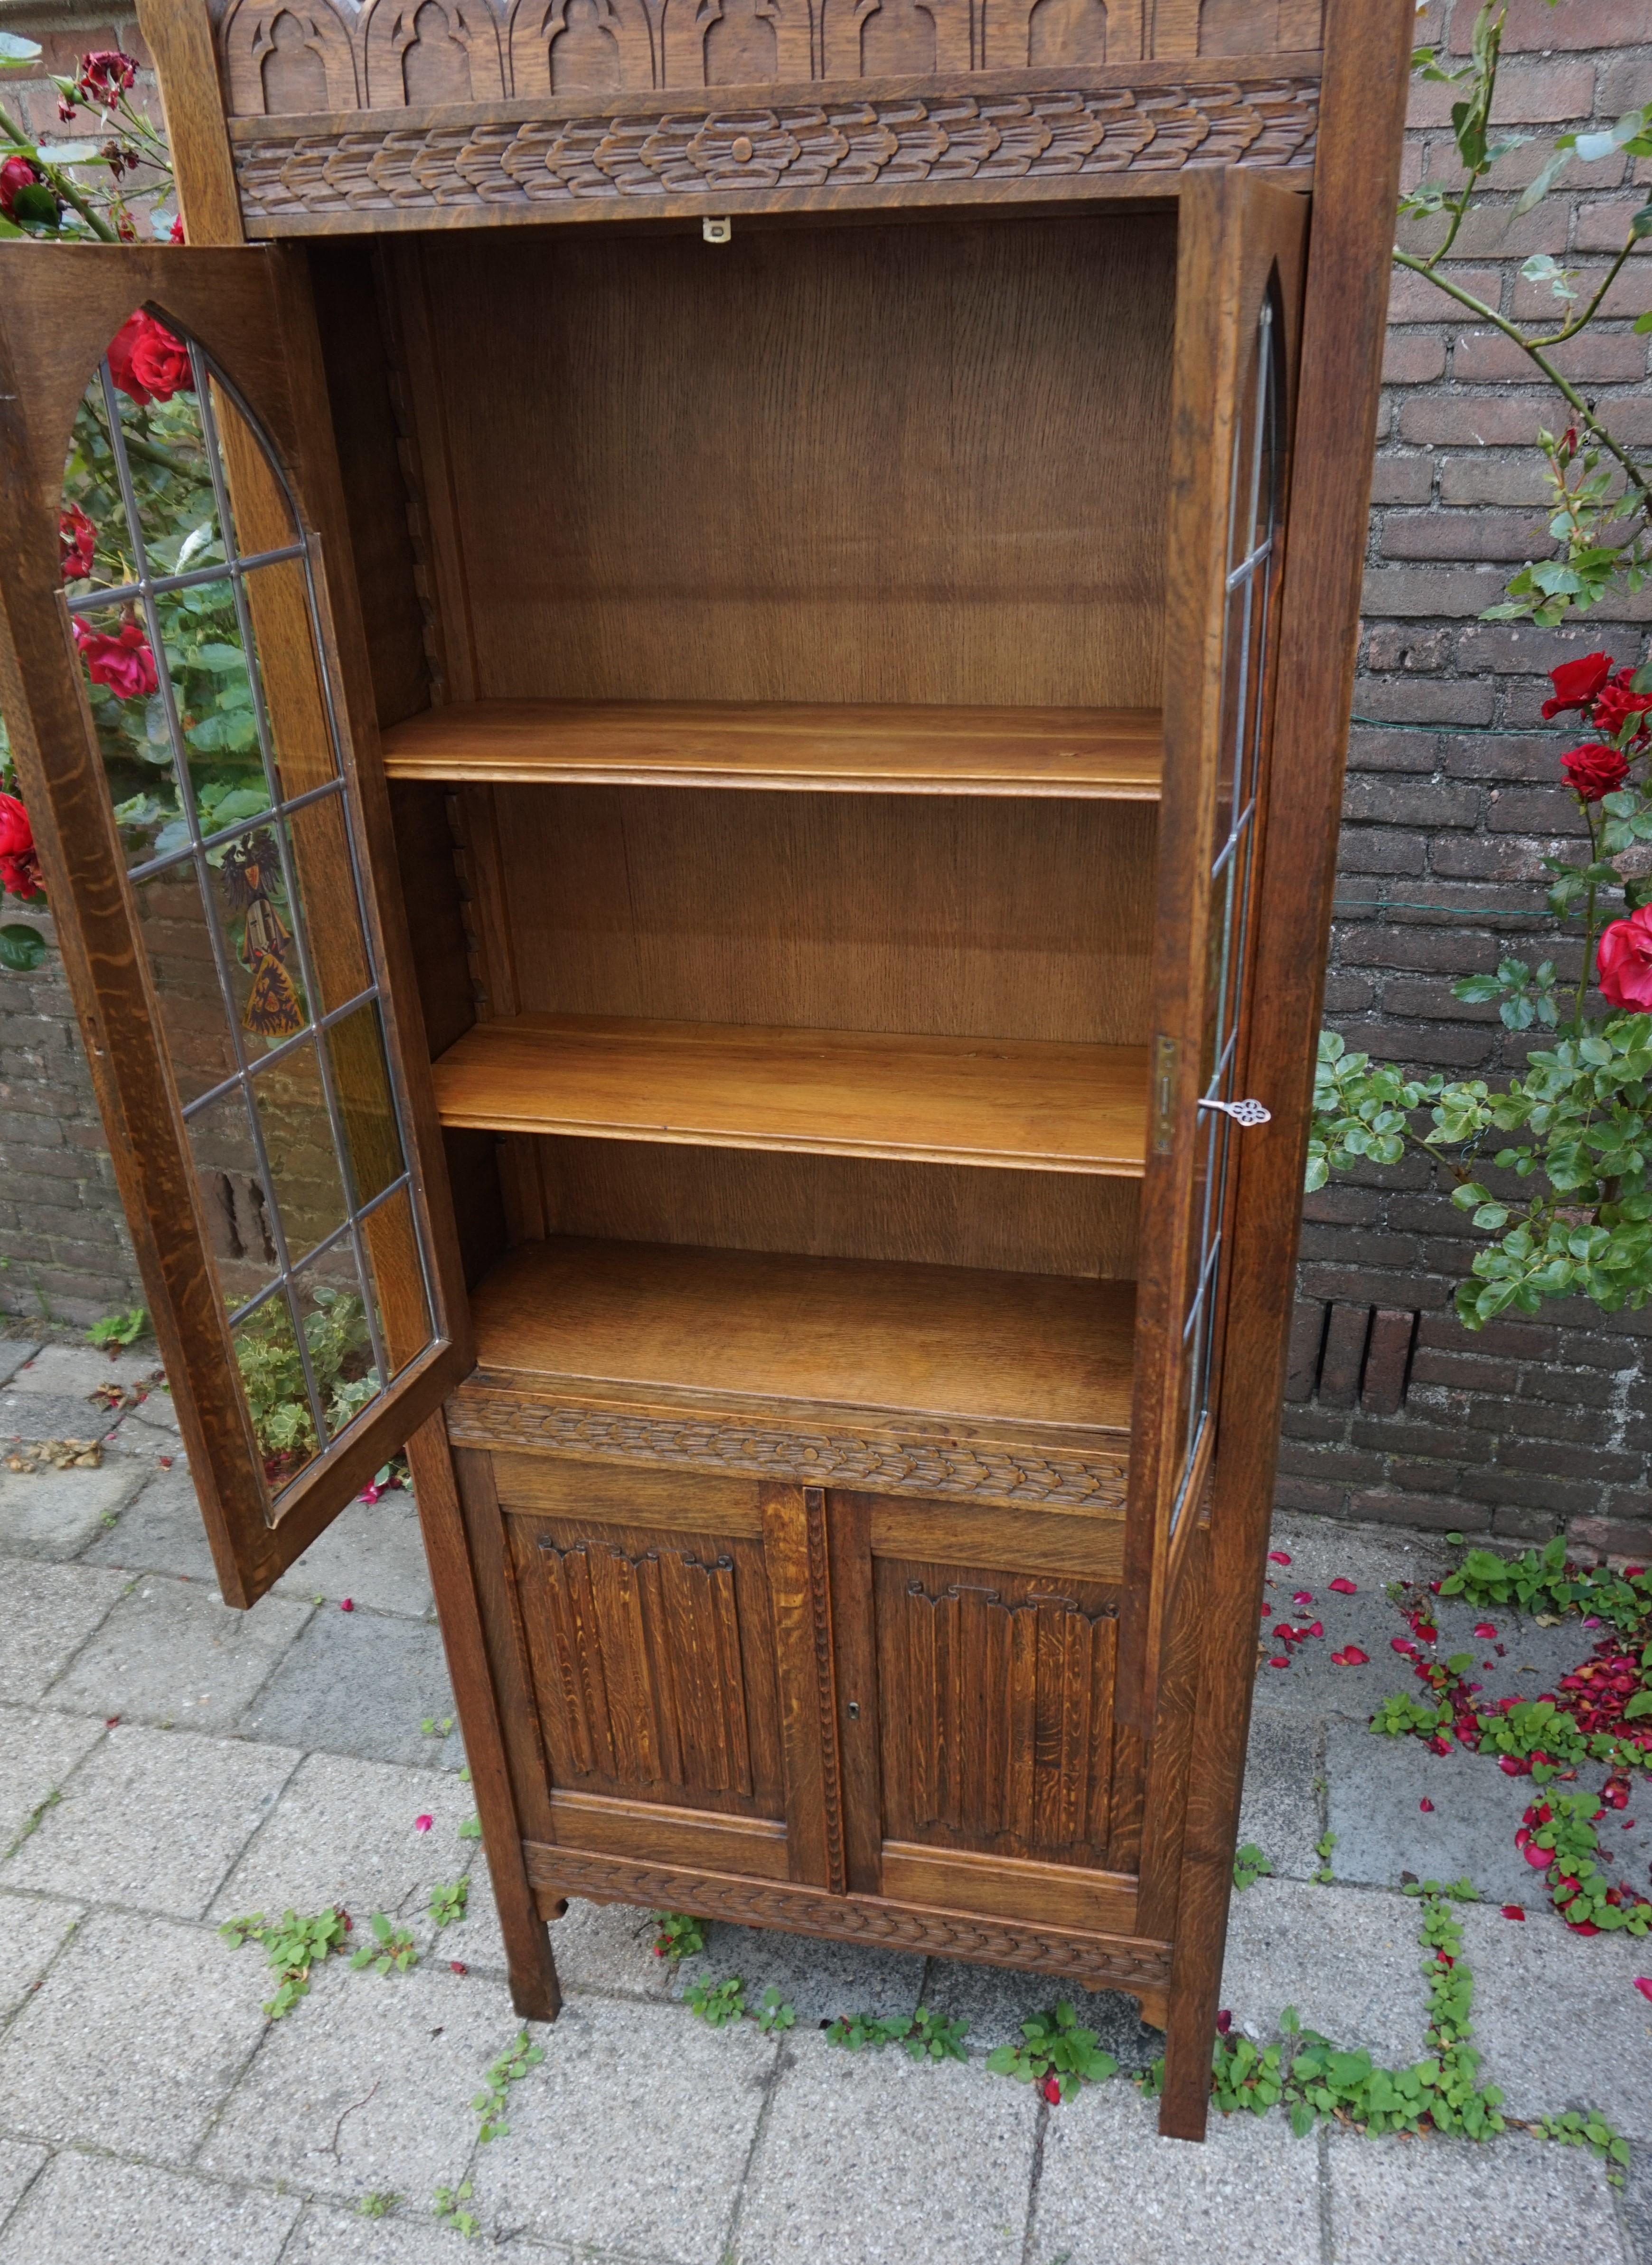 20th Century Early 1900s Gothic Revival Tall Bookcase/ Cabinet with Stained Glass Windows